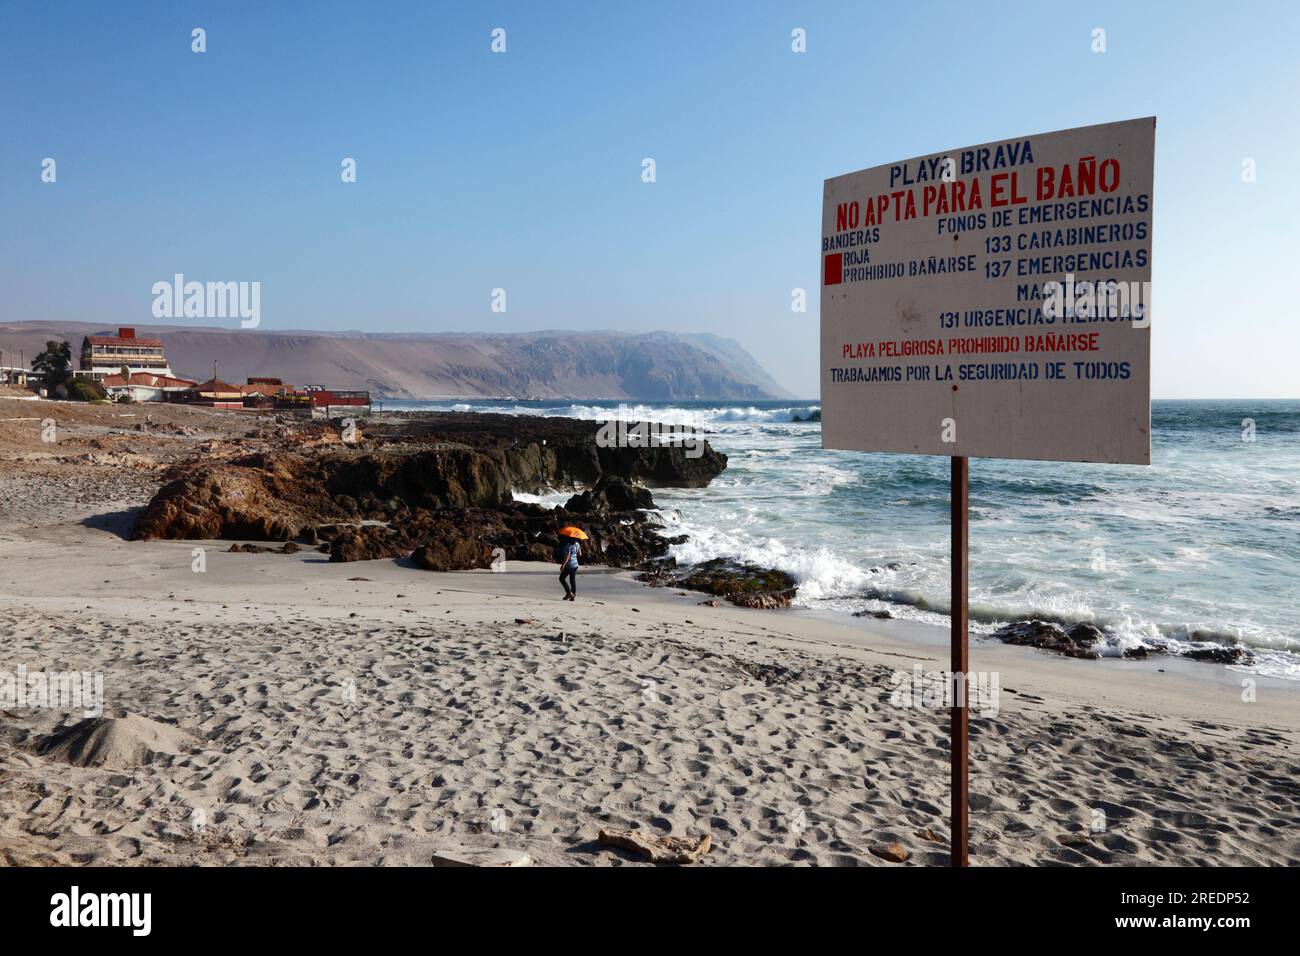 Dangerous beach, bathing prohibited sign with emergency contact phone numbers at Playa Brava on Pacific coast just south of Arica, Chile Stock Photo